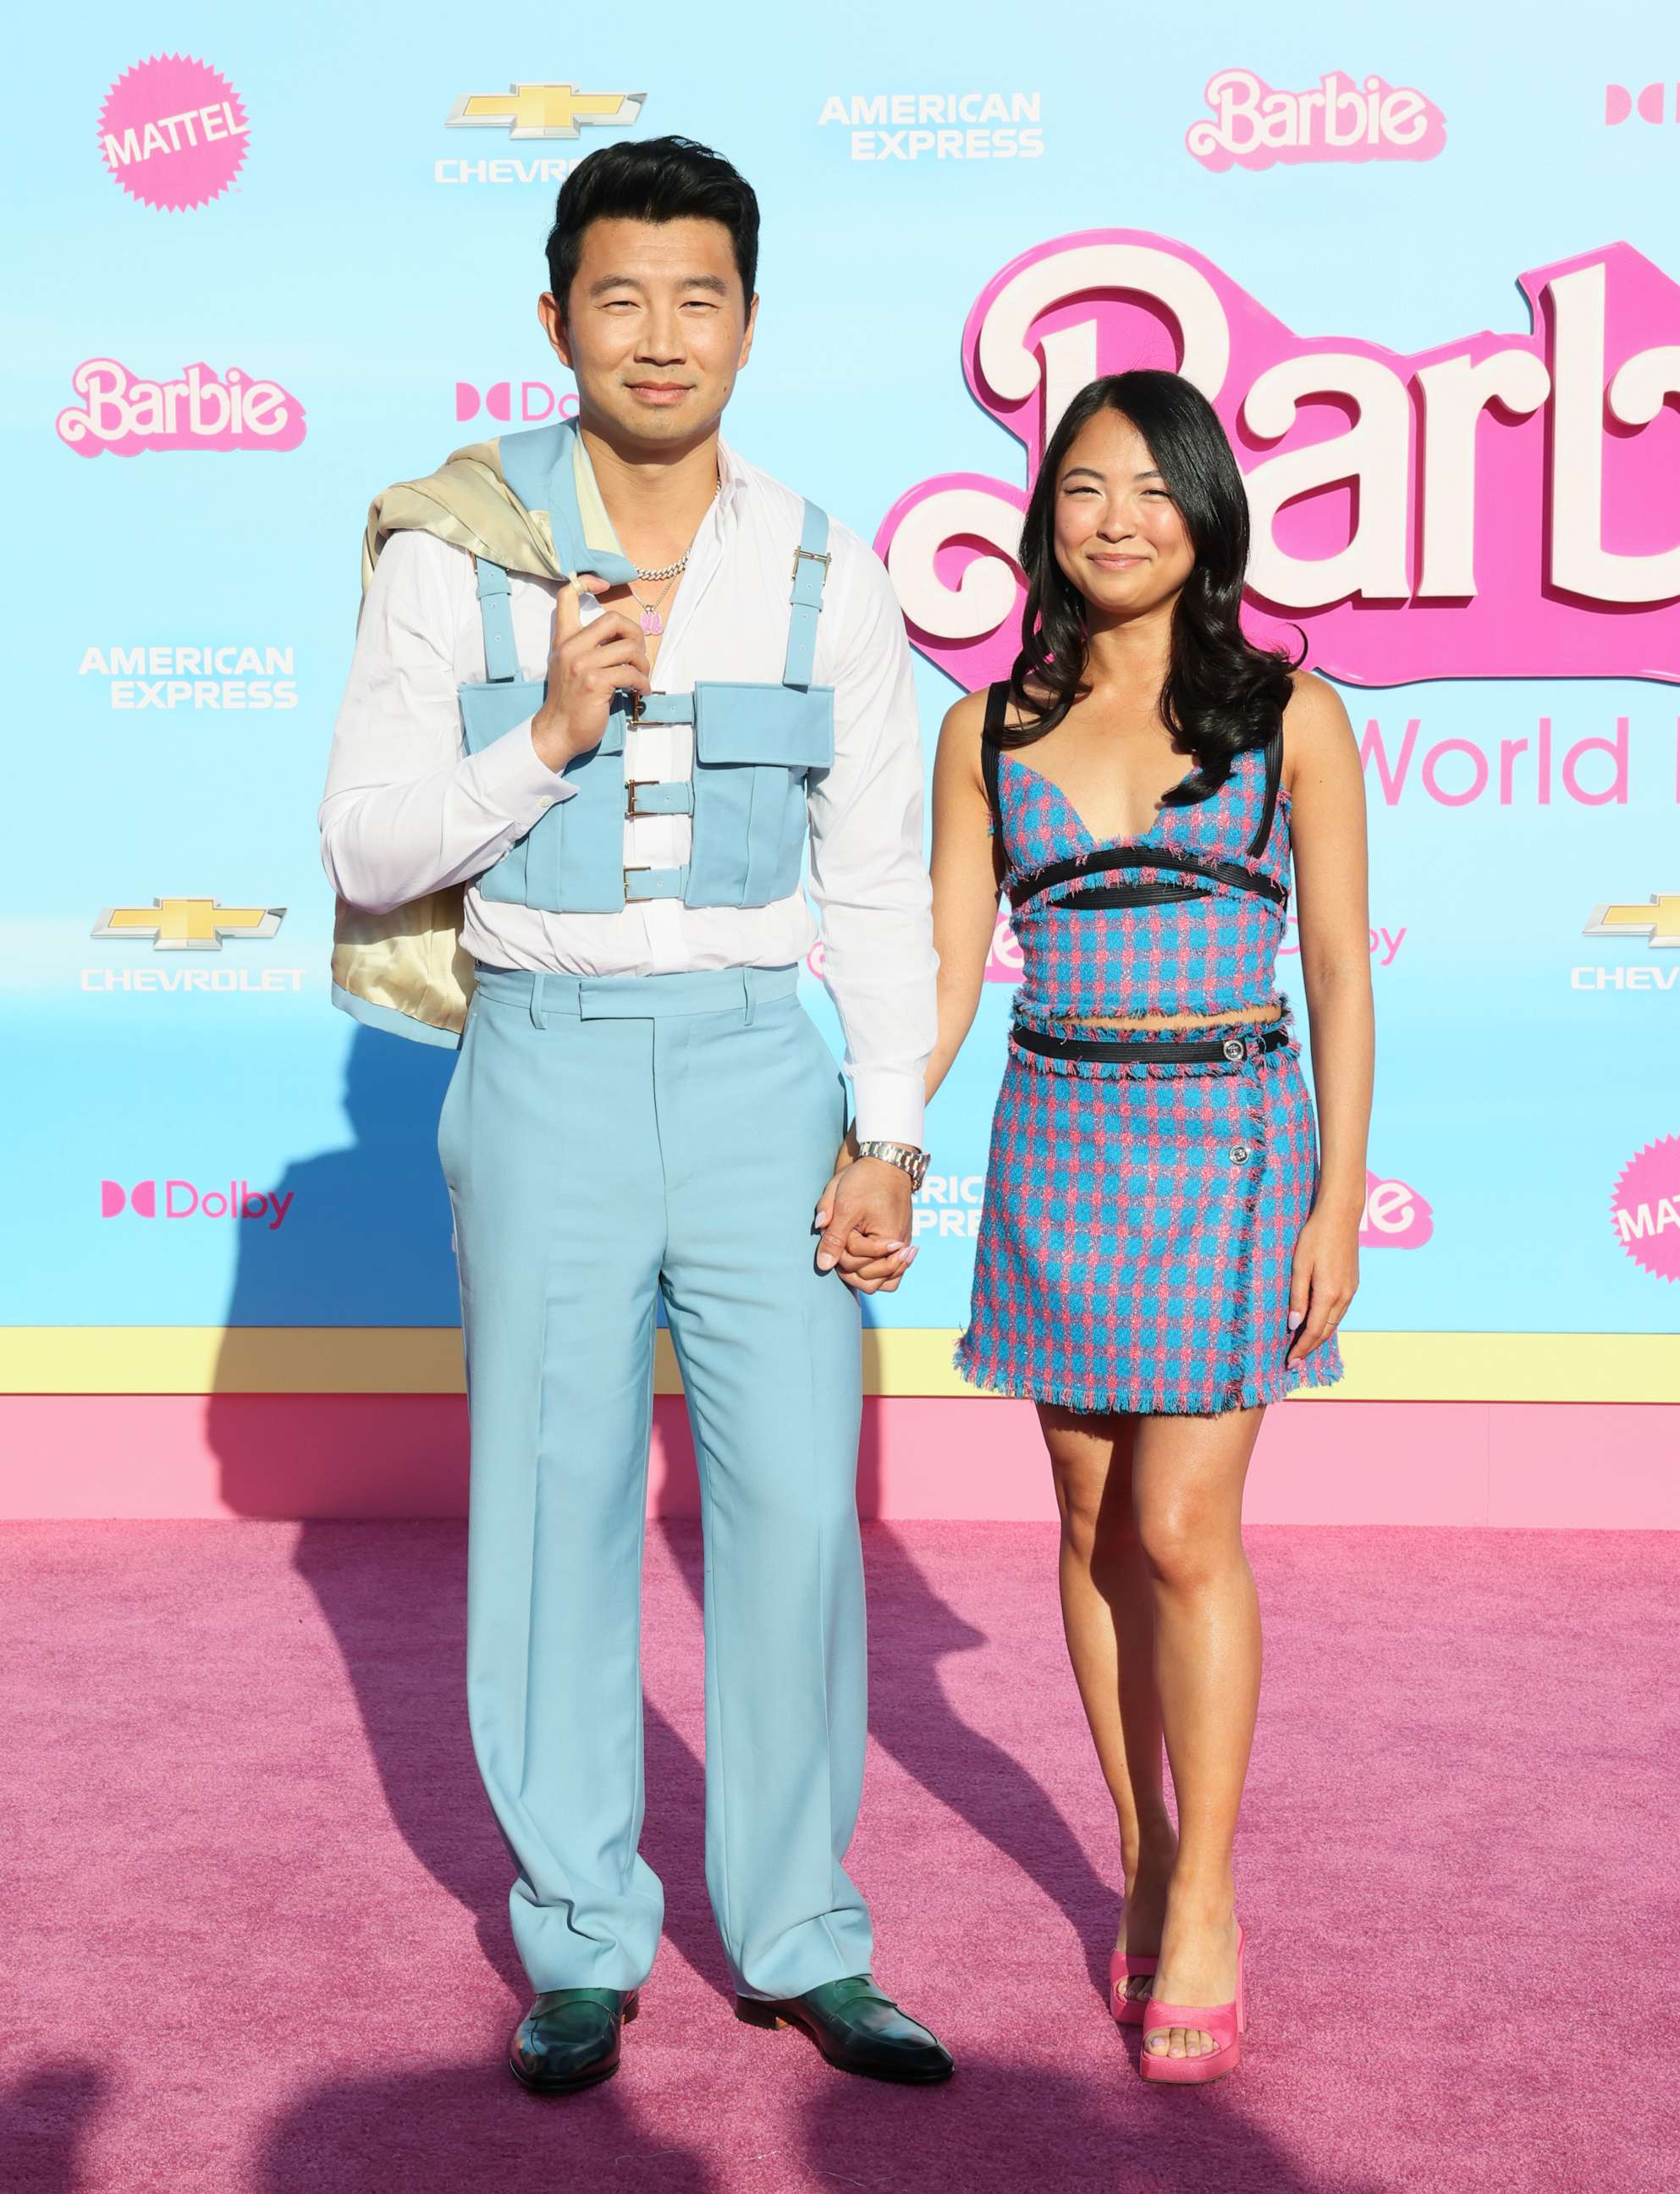 PHOTO: Simu Liu and Allison Hsu attend the World Premiere of "Barbie" at Shrine Auditorium and Expo Hall on July 9, 2023 in Los Angeles.